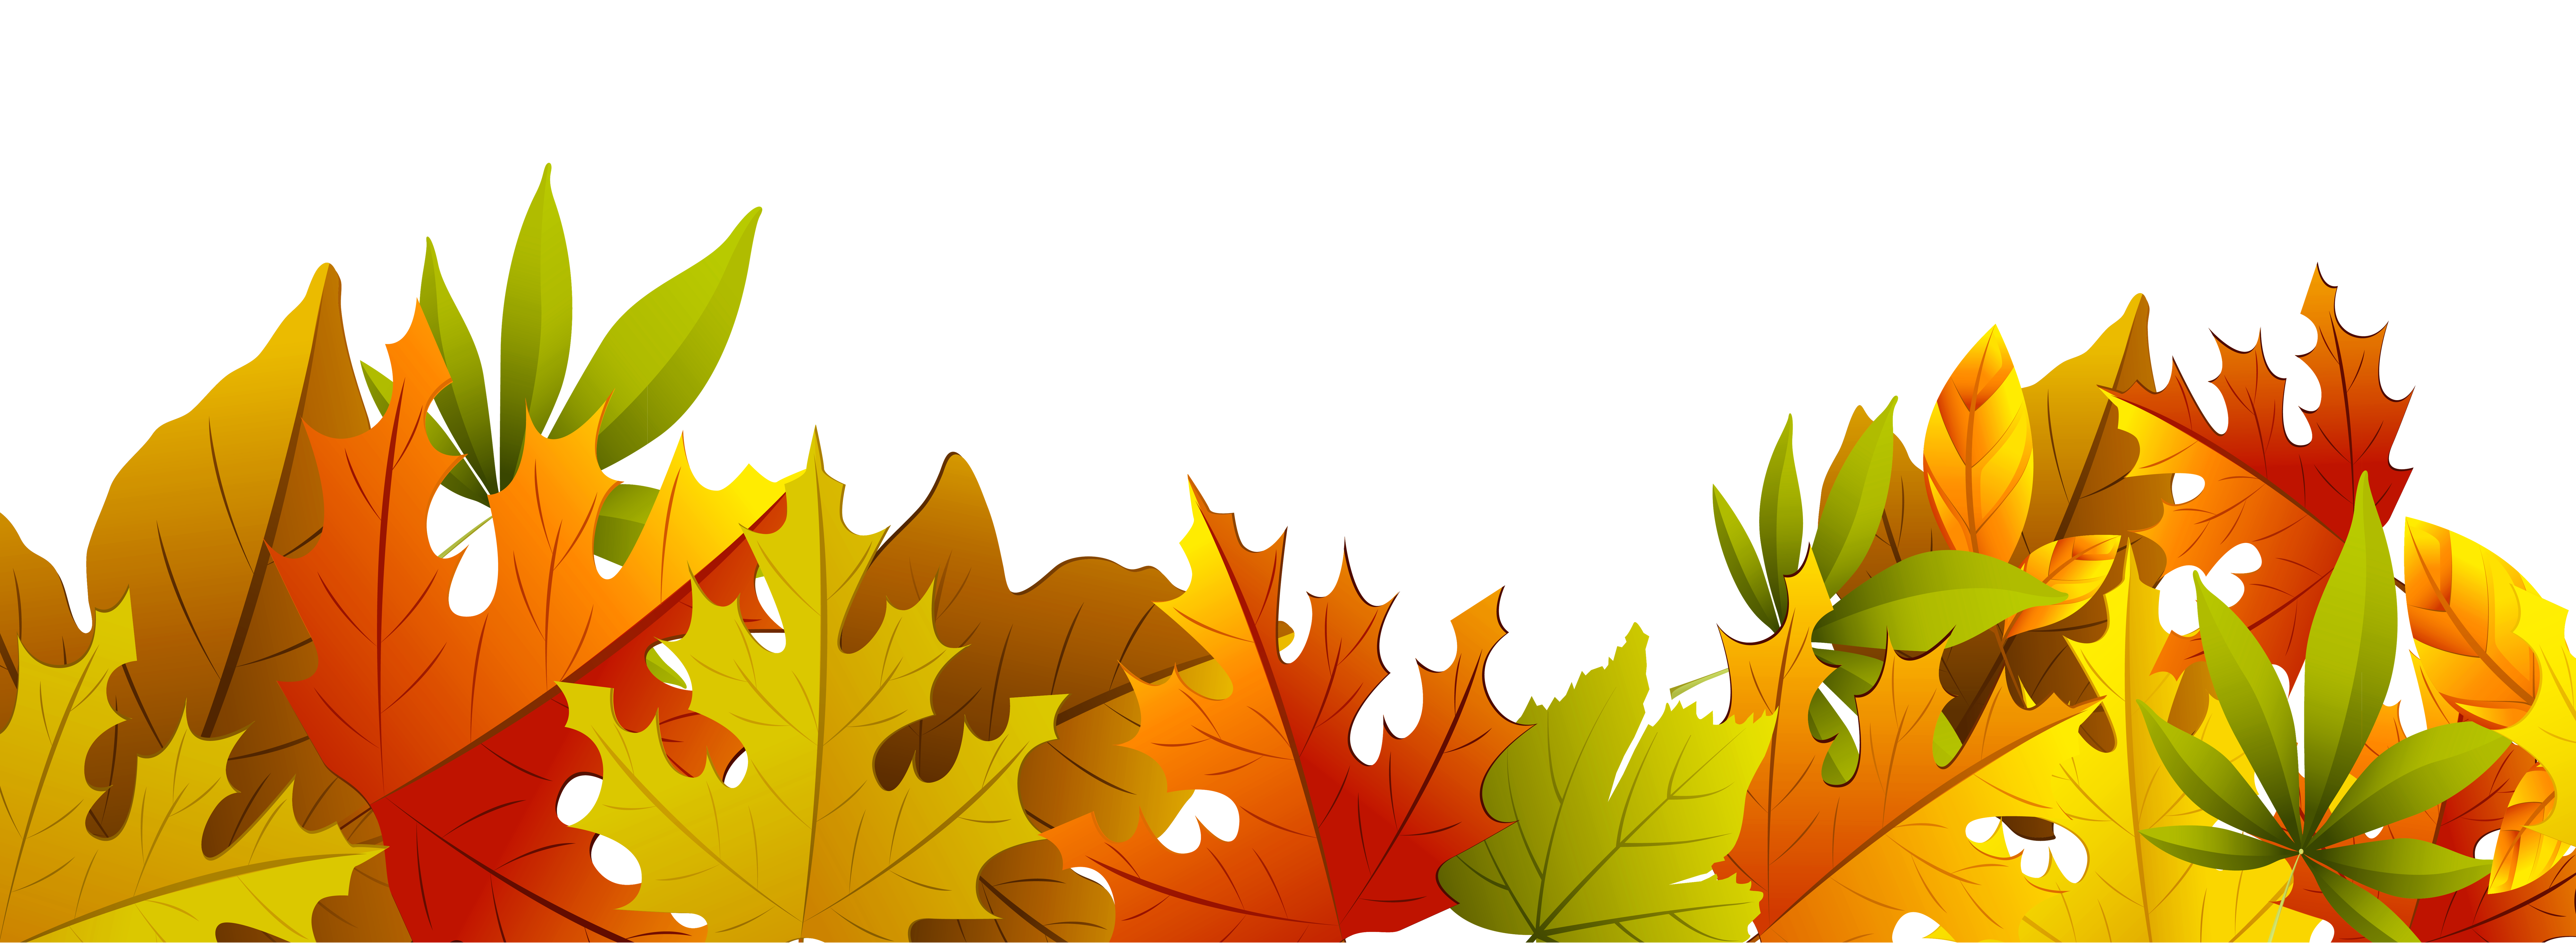 Free Autumn Leaves Clip Art Download Free Autumn Leaves Clip Art Png